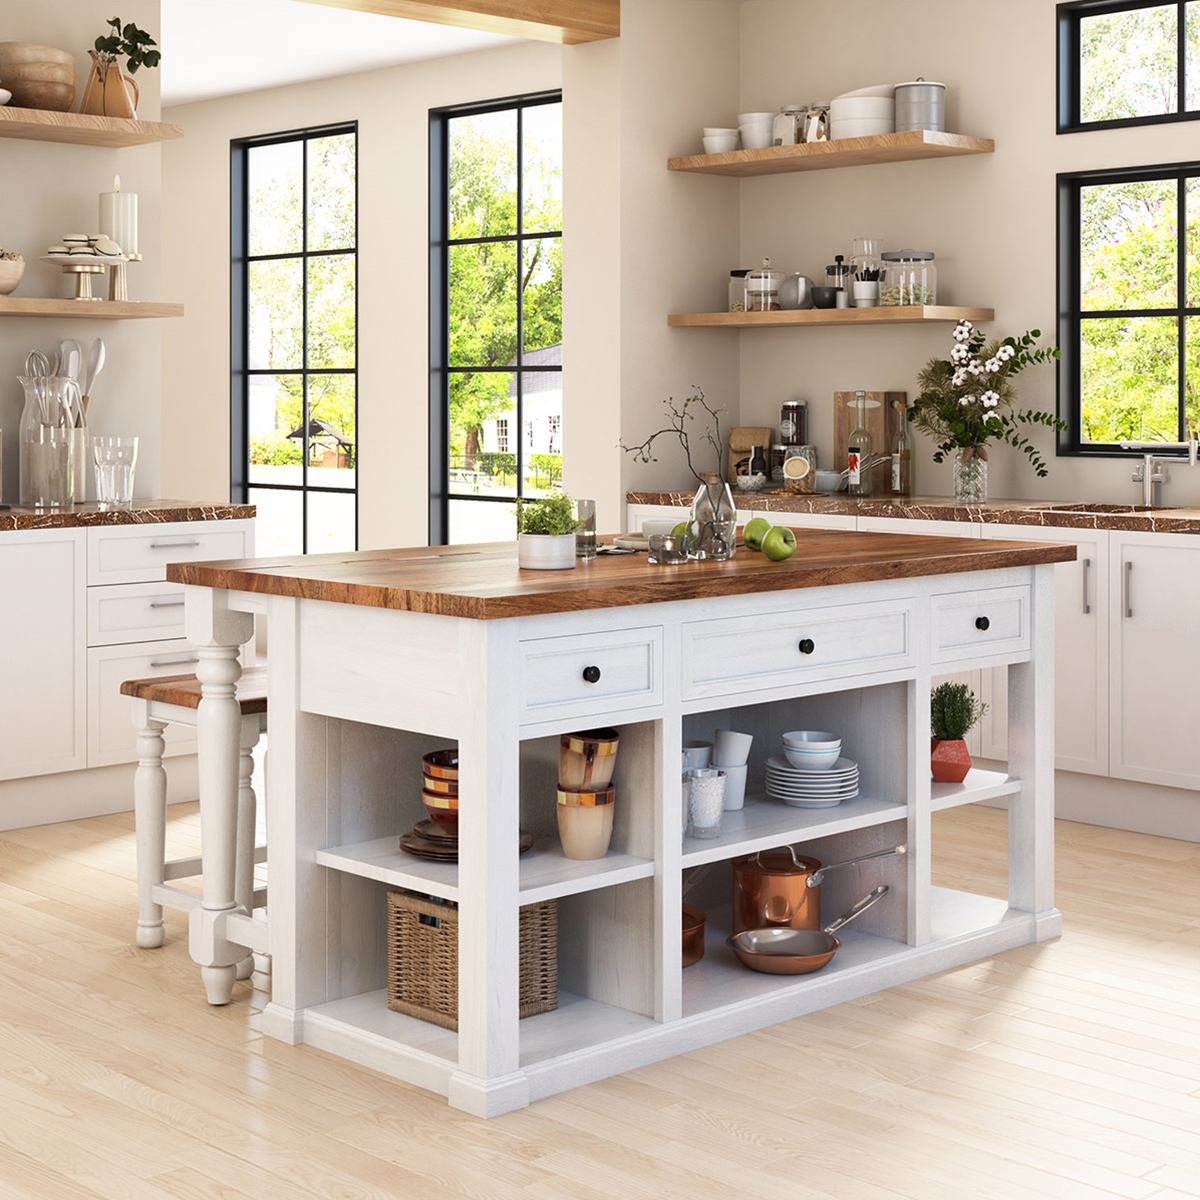 https://www.sierralivingconcepts.com/images/thumbs/0409343_rhinebeck-rustic-farmhouse-kitchen-island-with-seating-and-storage.jpeg